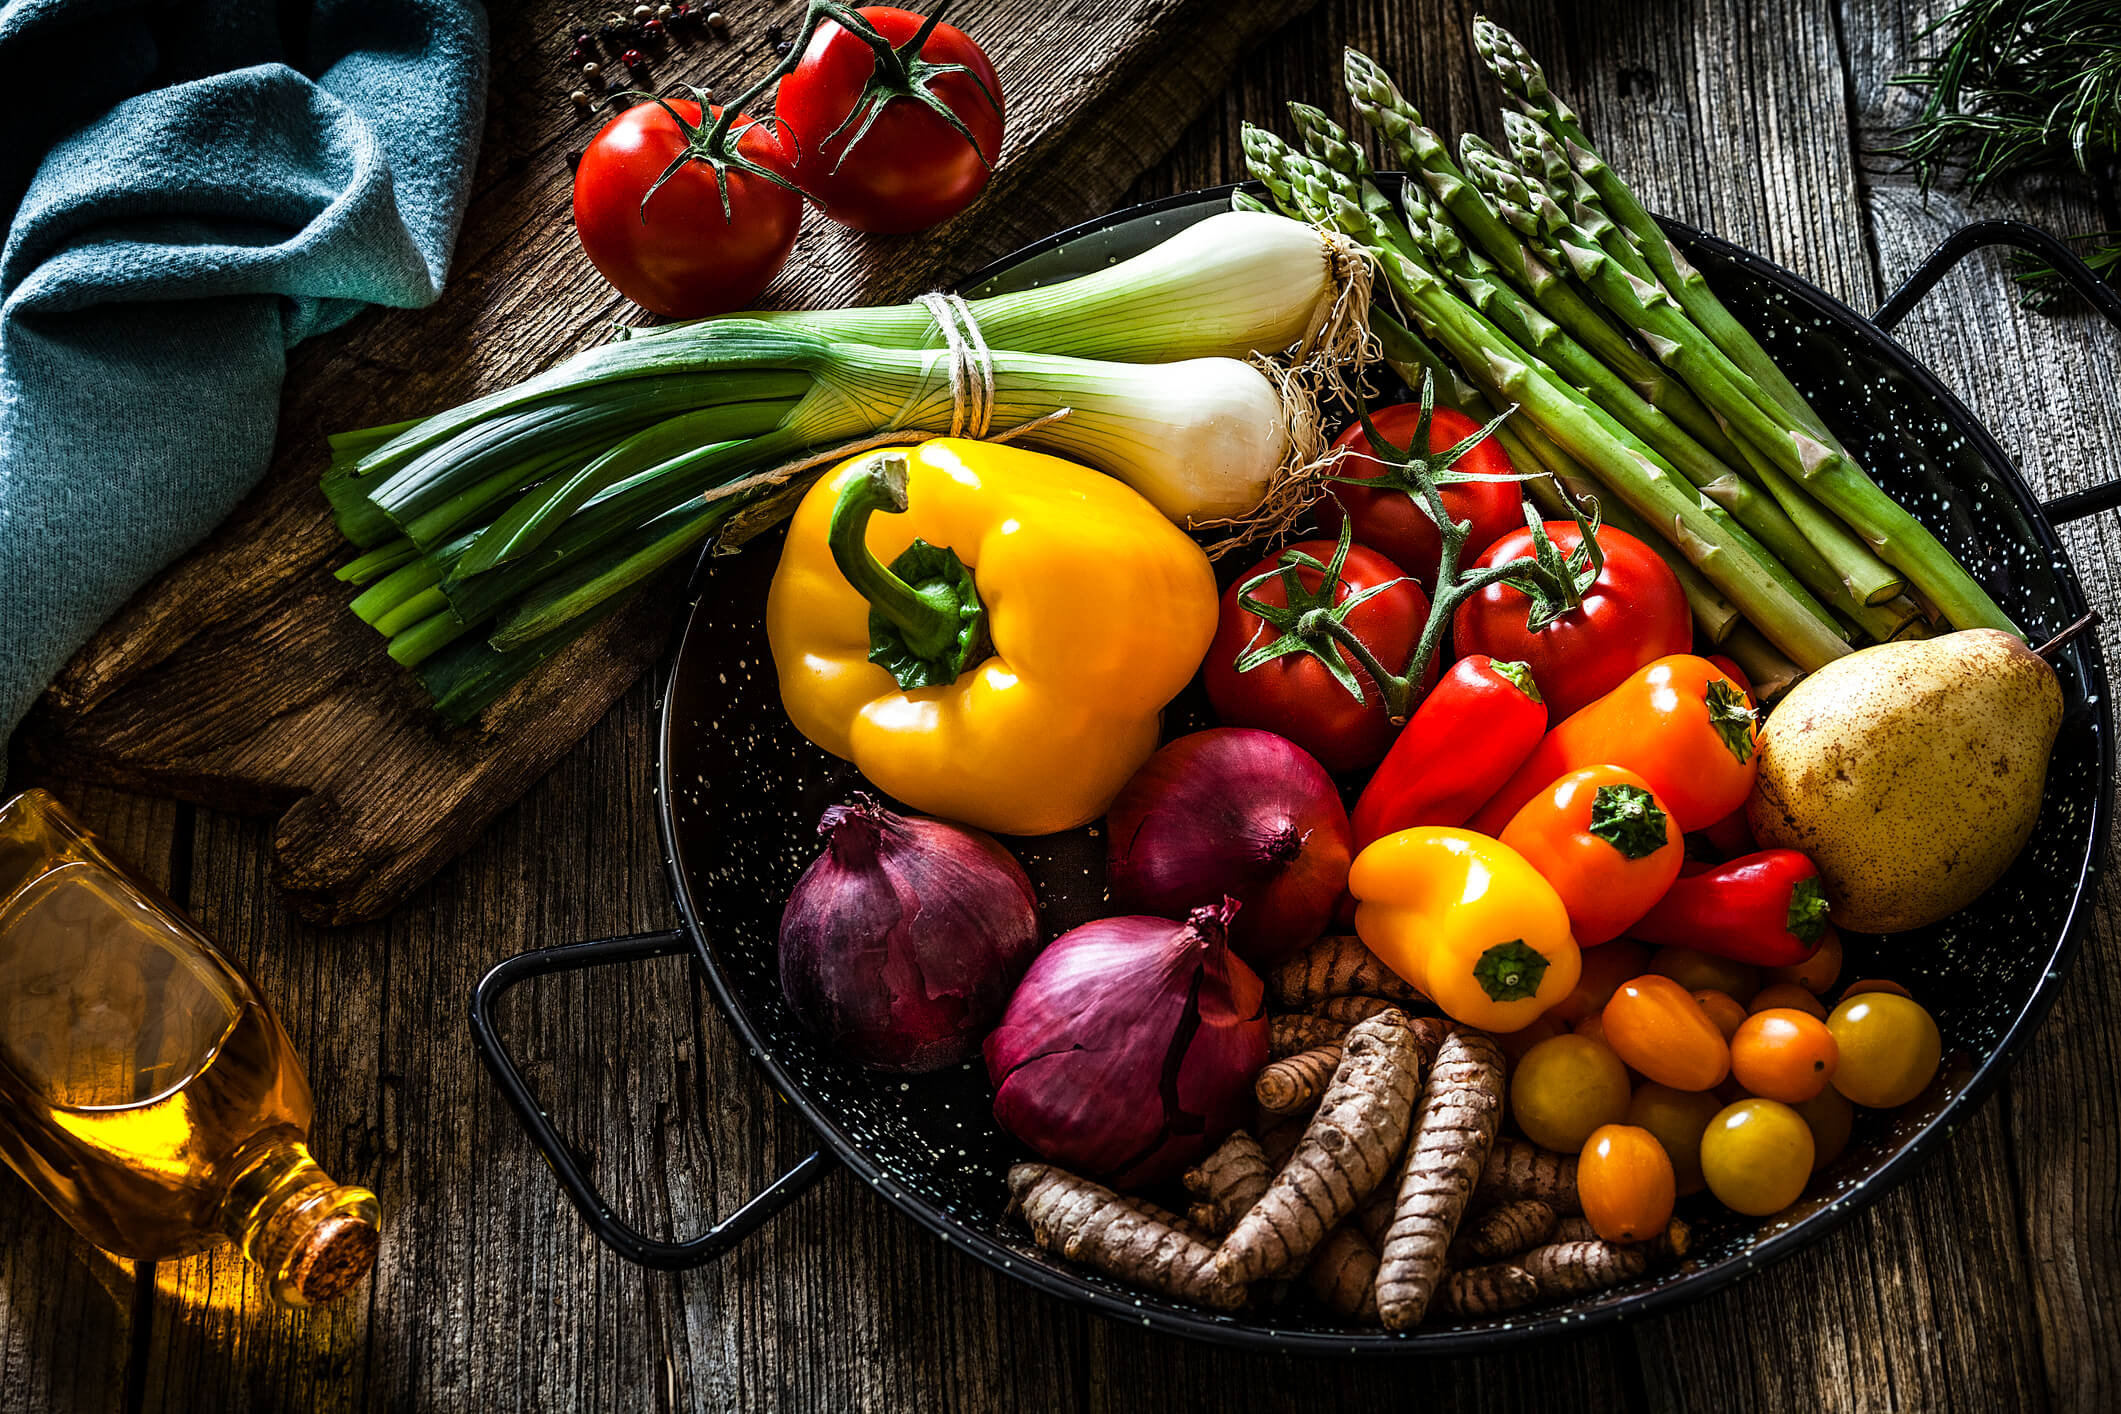 Vegetables are one type of organic food. Shown are peppers, asparagus, tomatoes, and onions